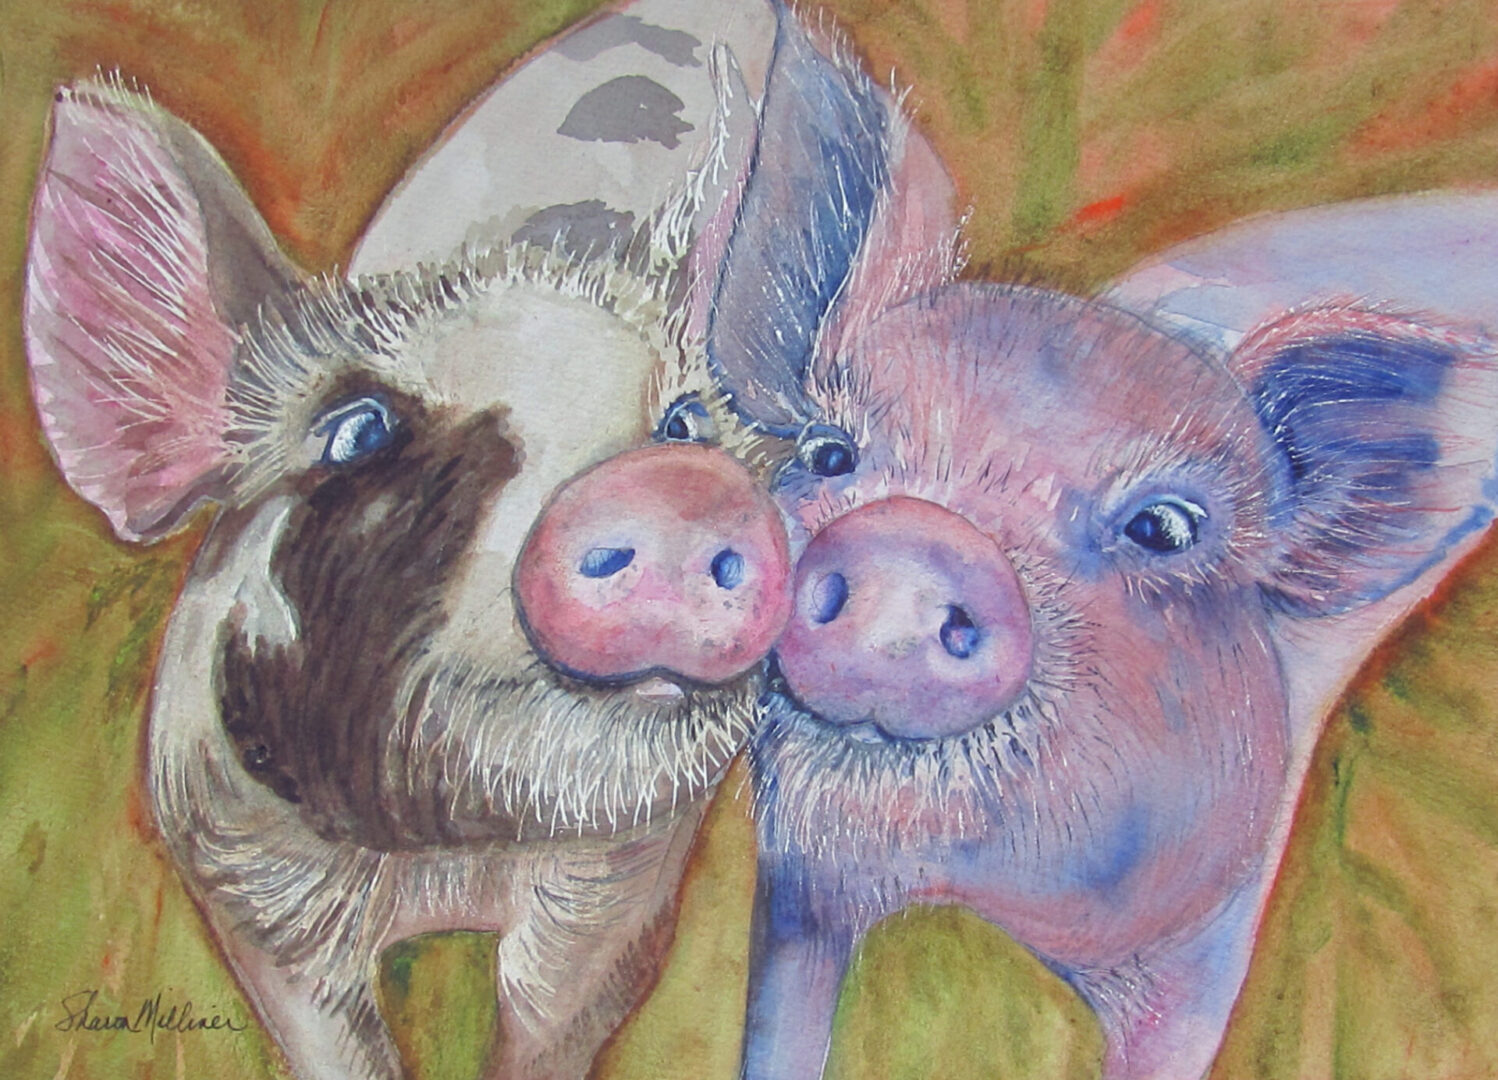 A painting of two pigs looking at each other.